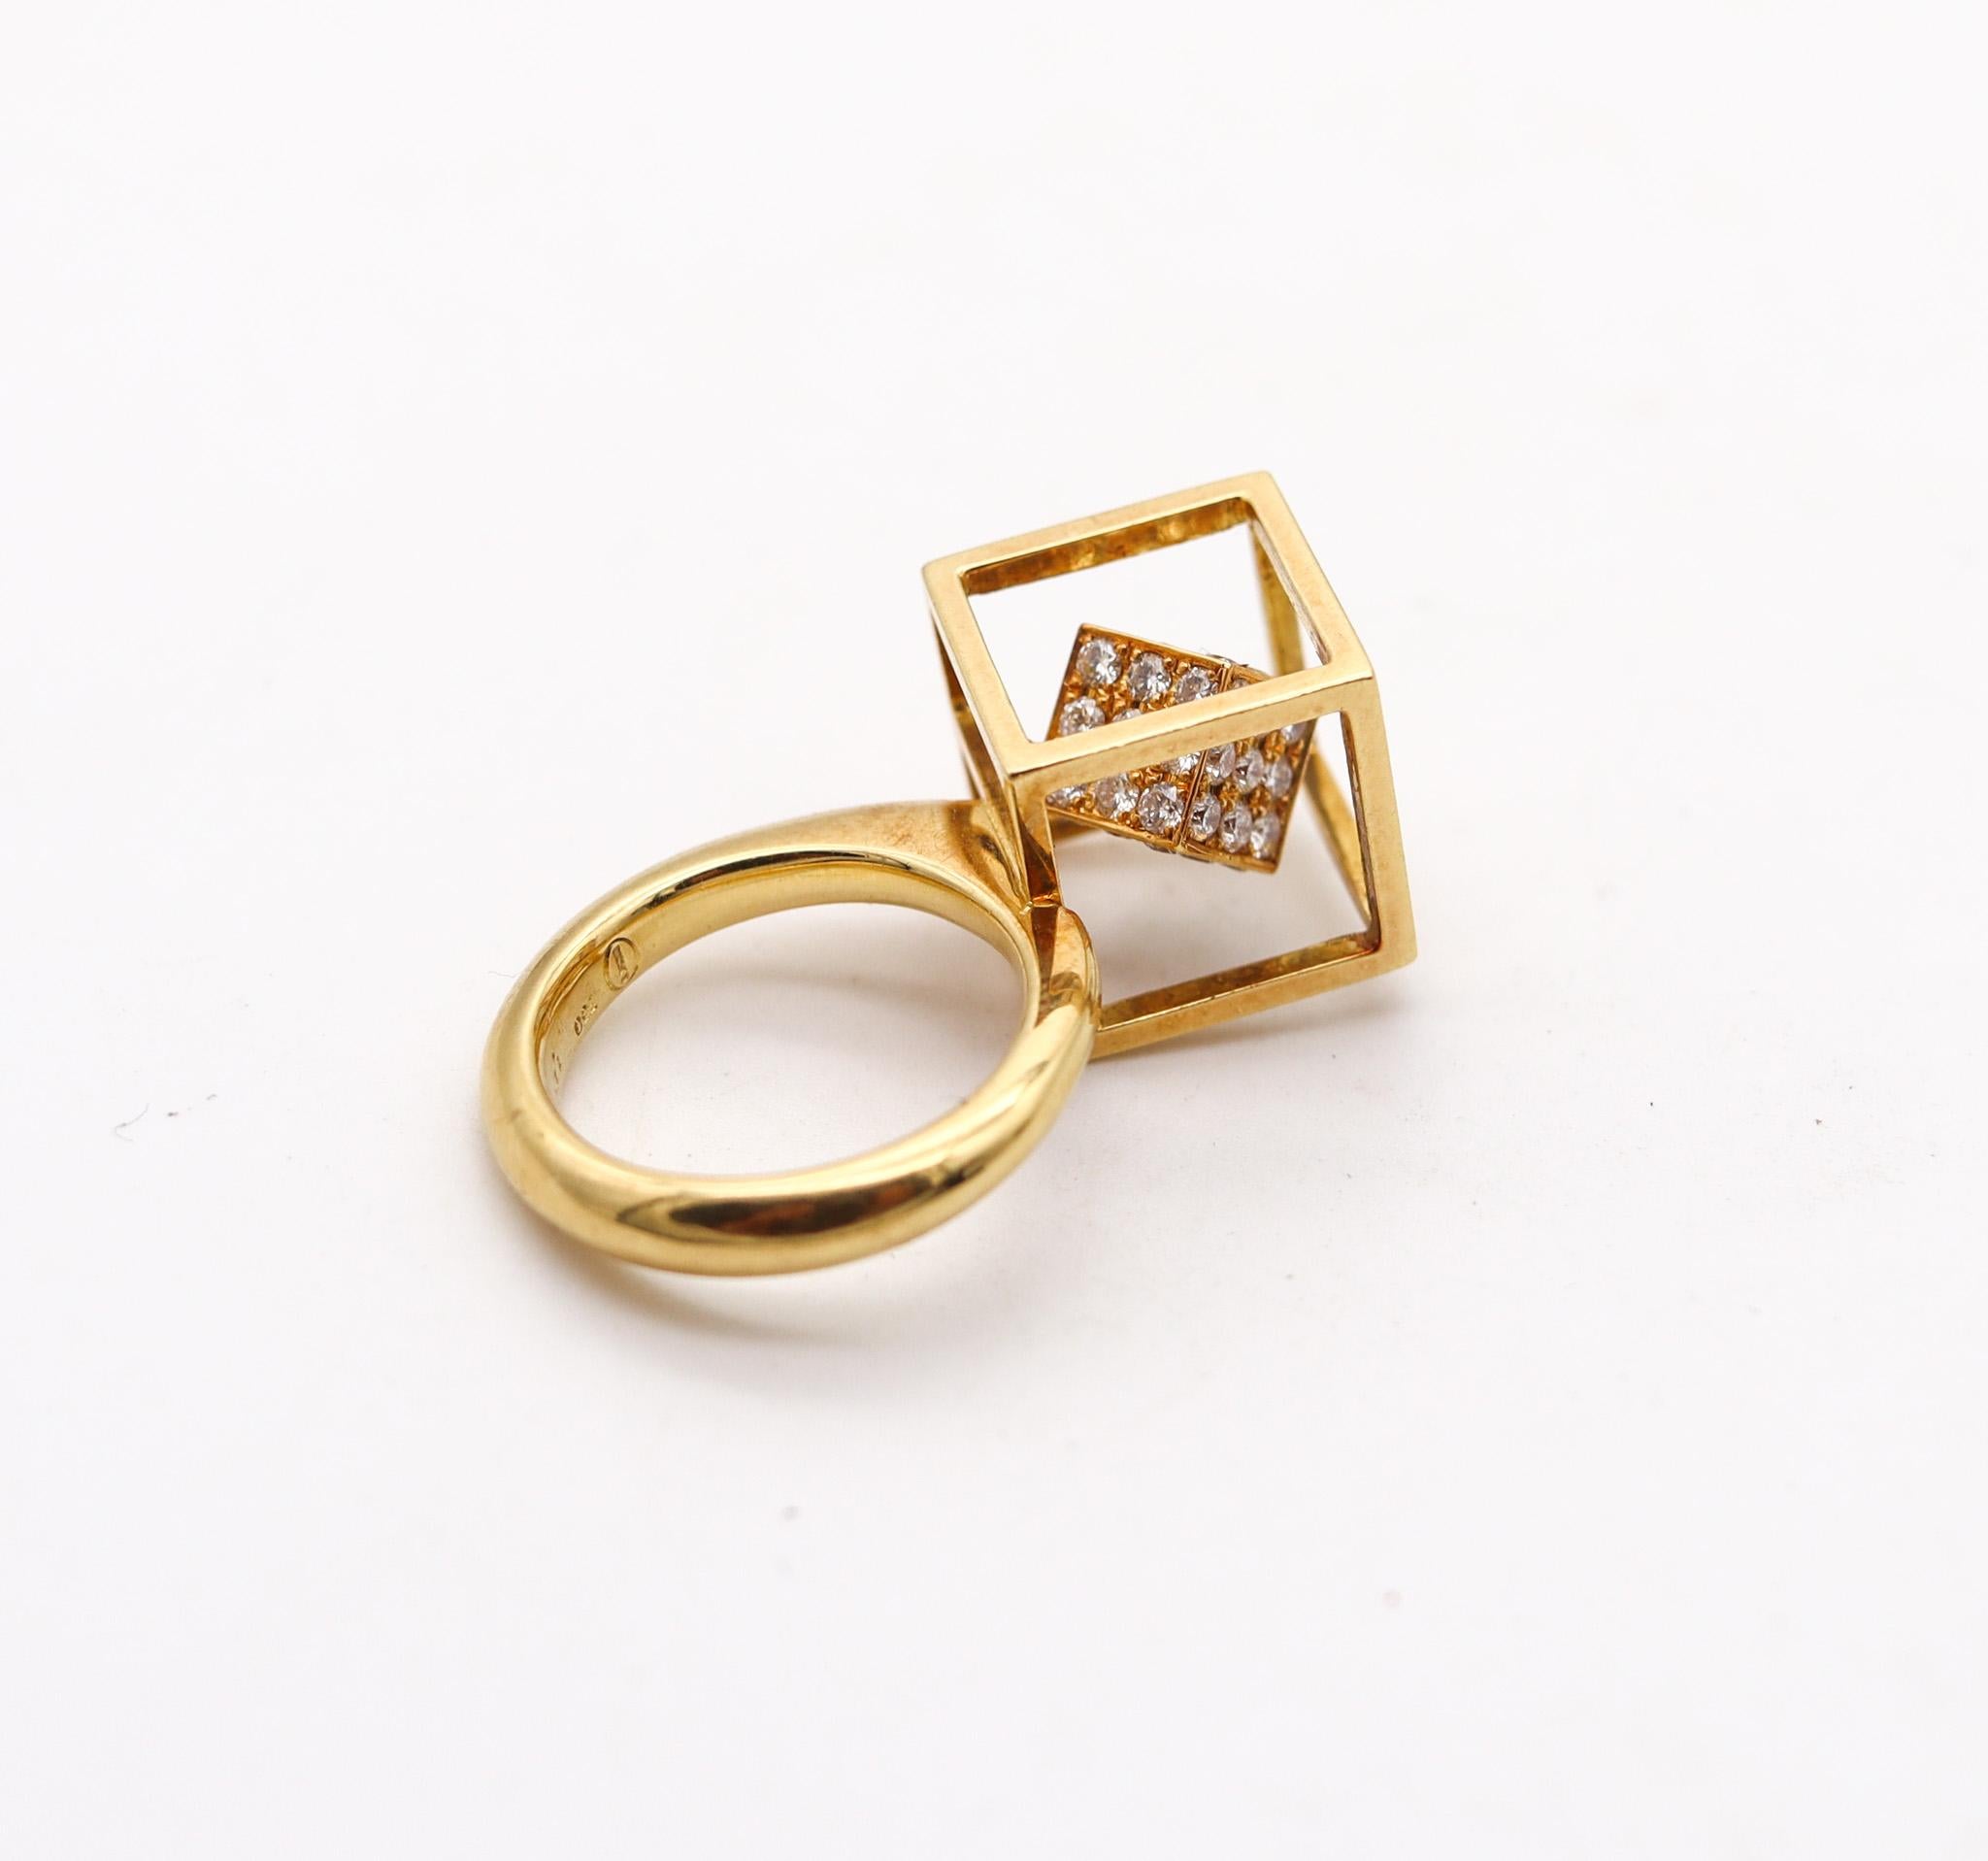 Sculptural op-art ring with diamonds.

An sculptural cocktail ring, created with op-art motifs. It was crafted in three dimensions in solid yellow gold of 18 karats with high polished finish. The design composed by a floating cube embellished with